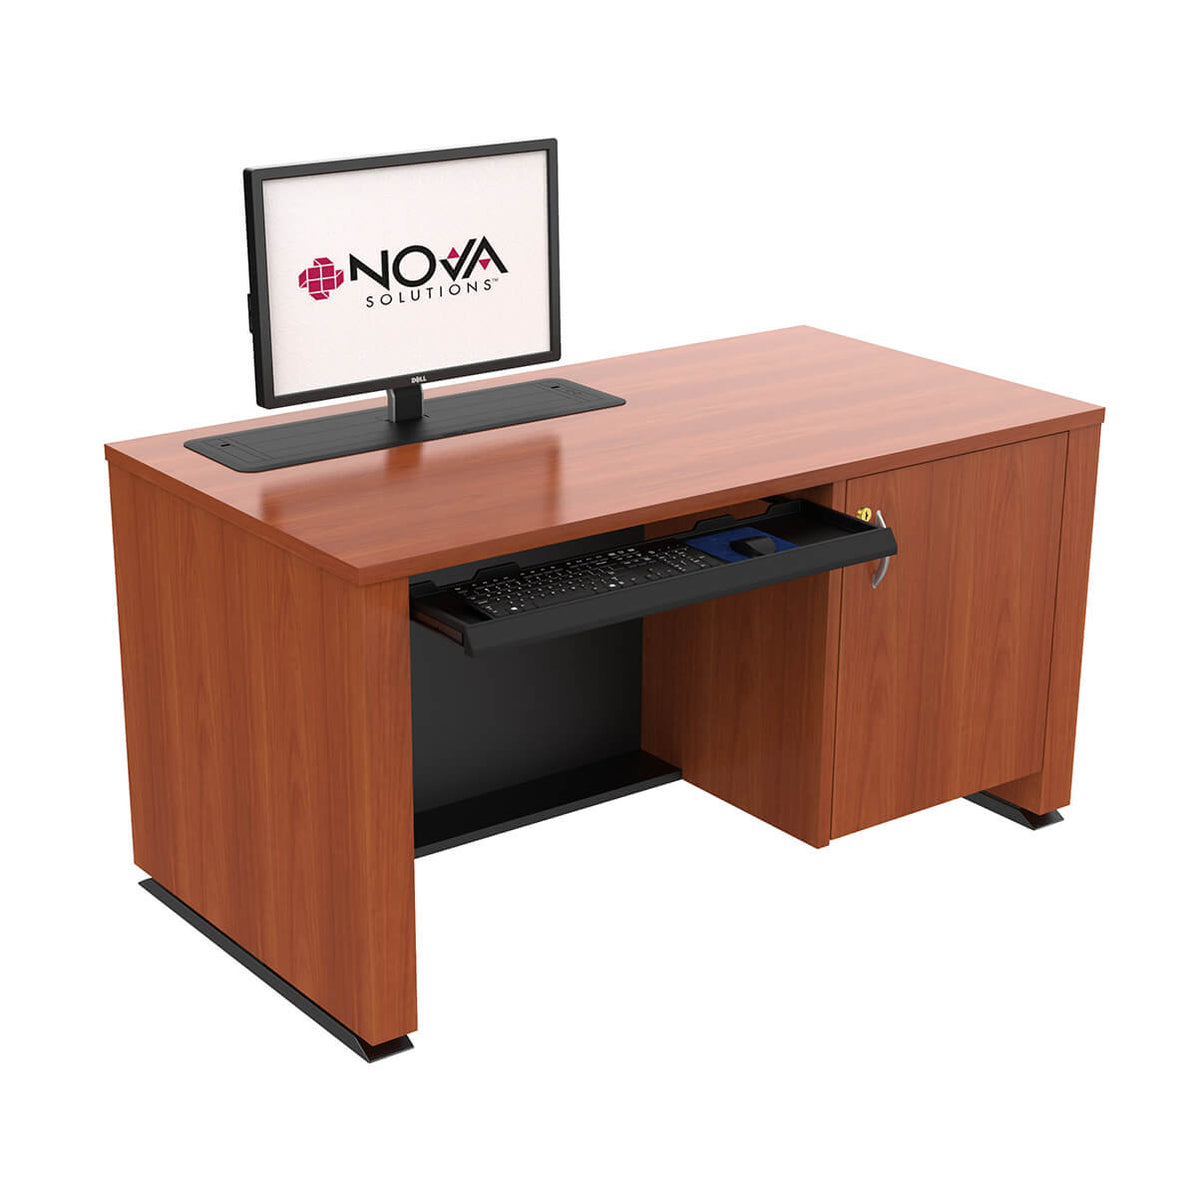 Height adjustable lectern with hidden monitor lift